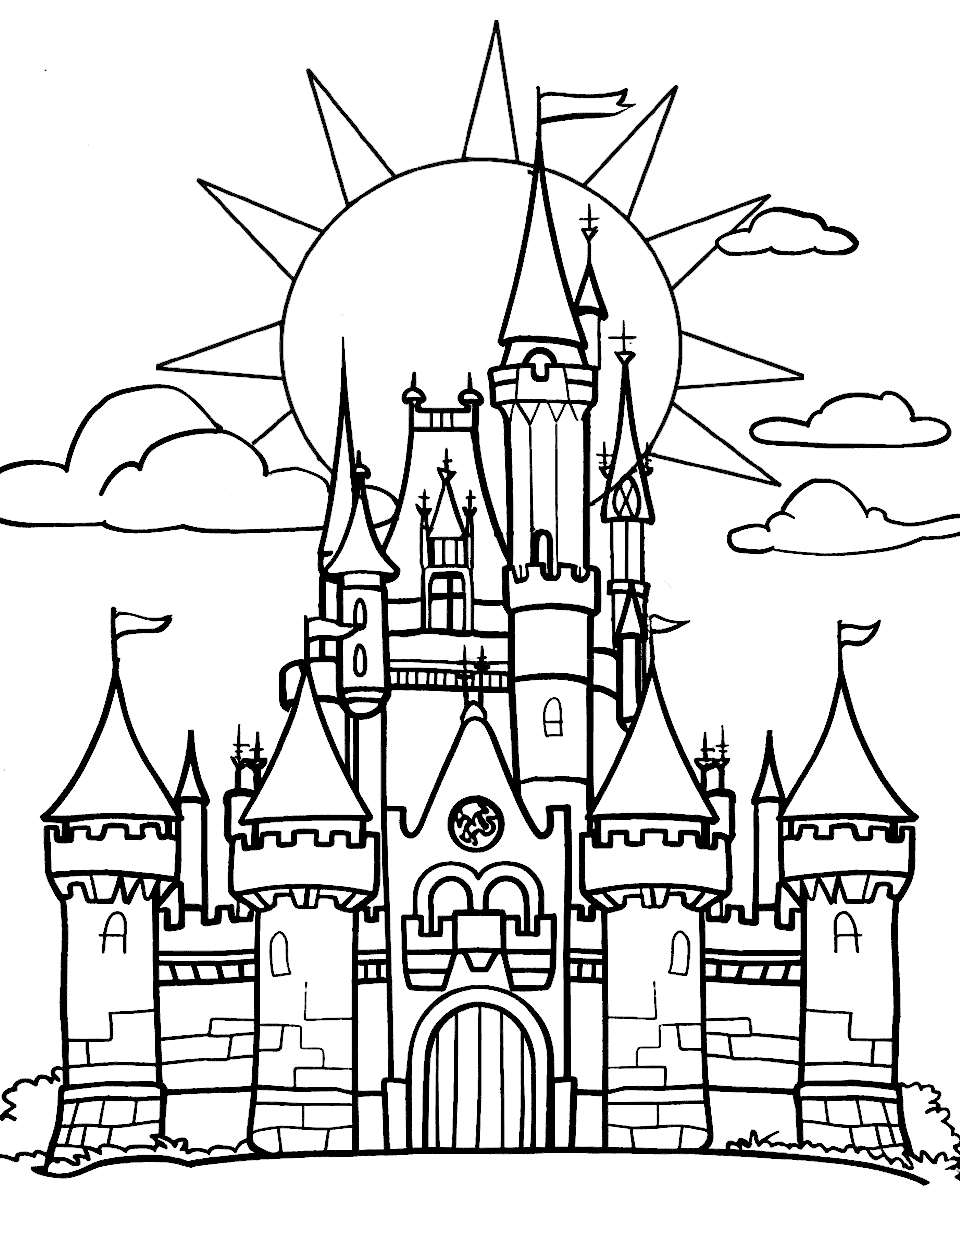 Sunset Castle Coloring Page - A simple castle scene against a sunset background.